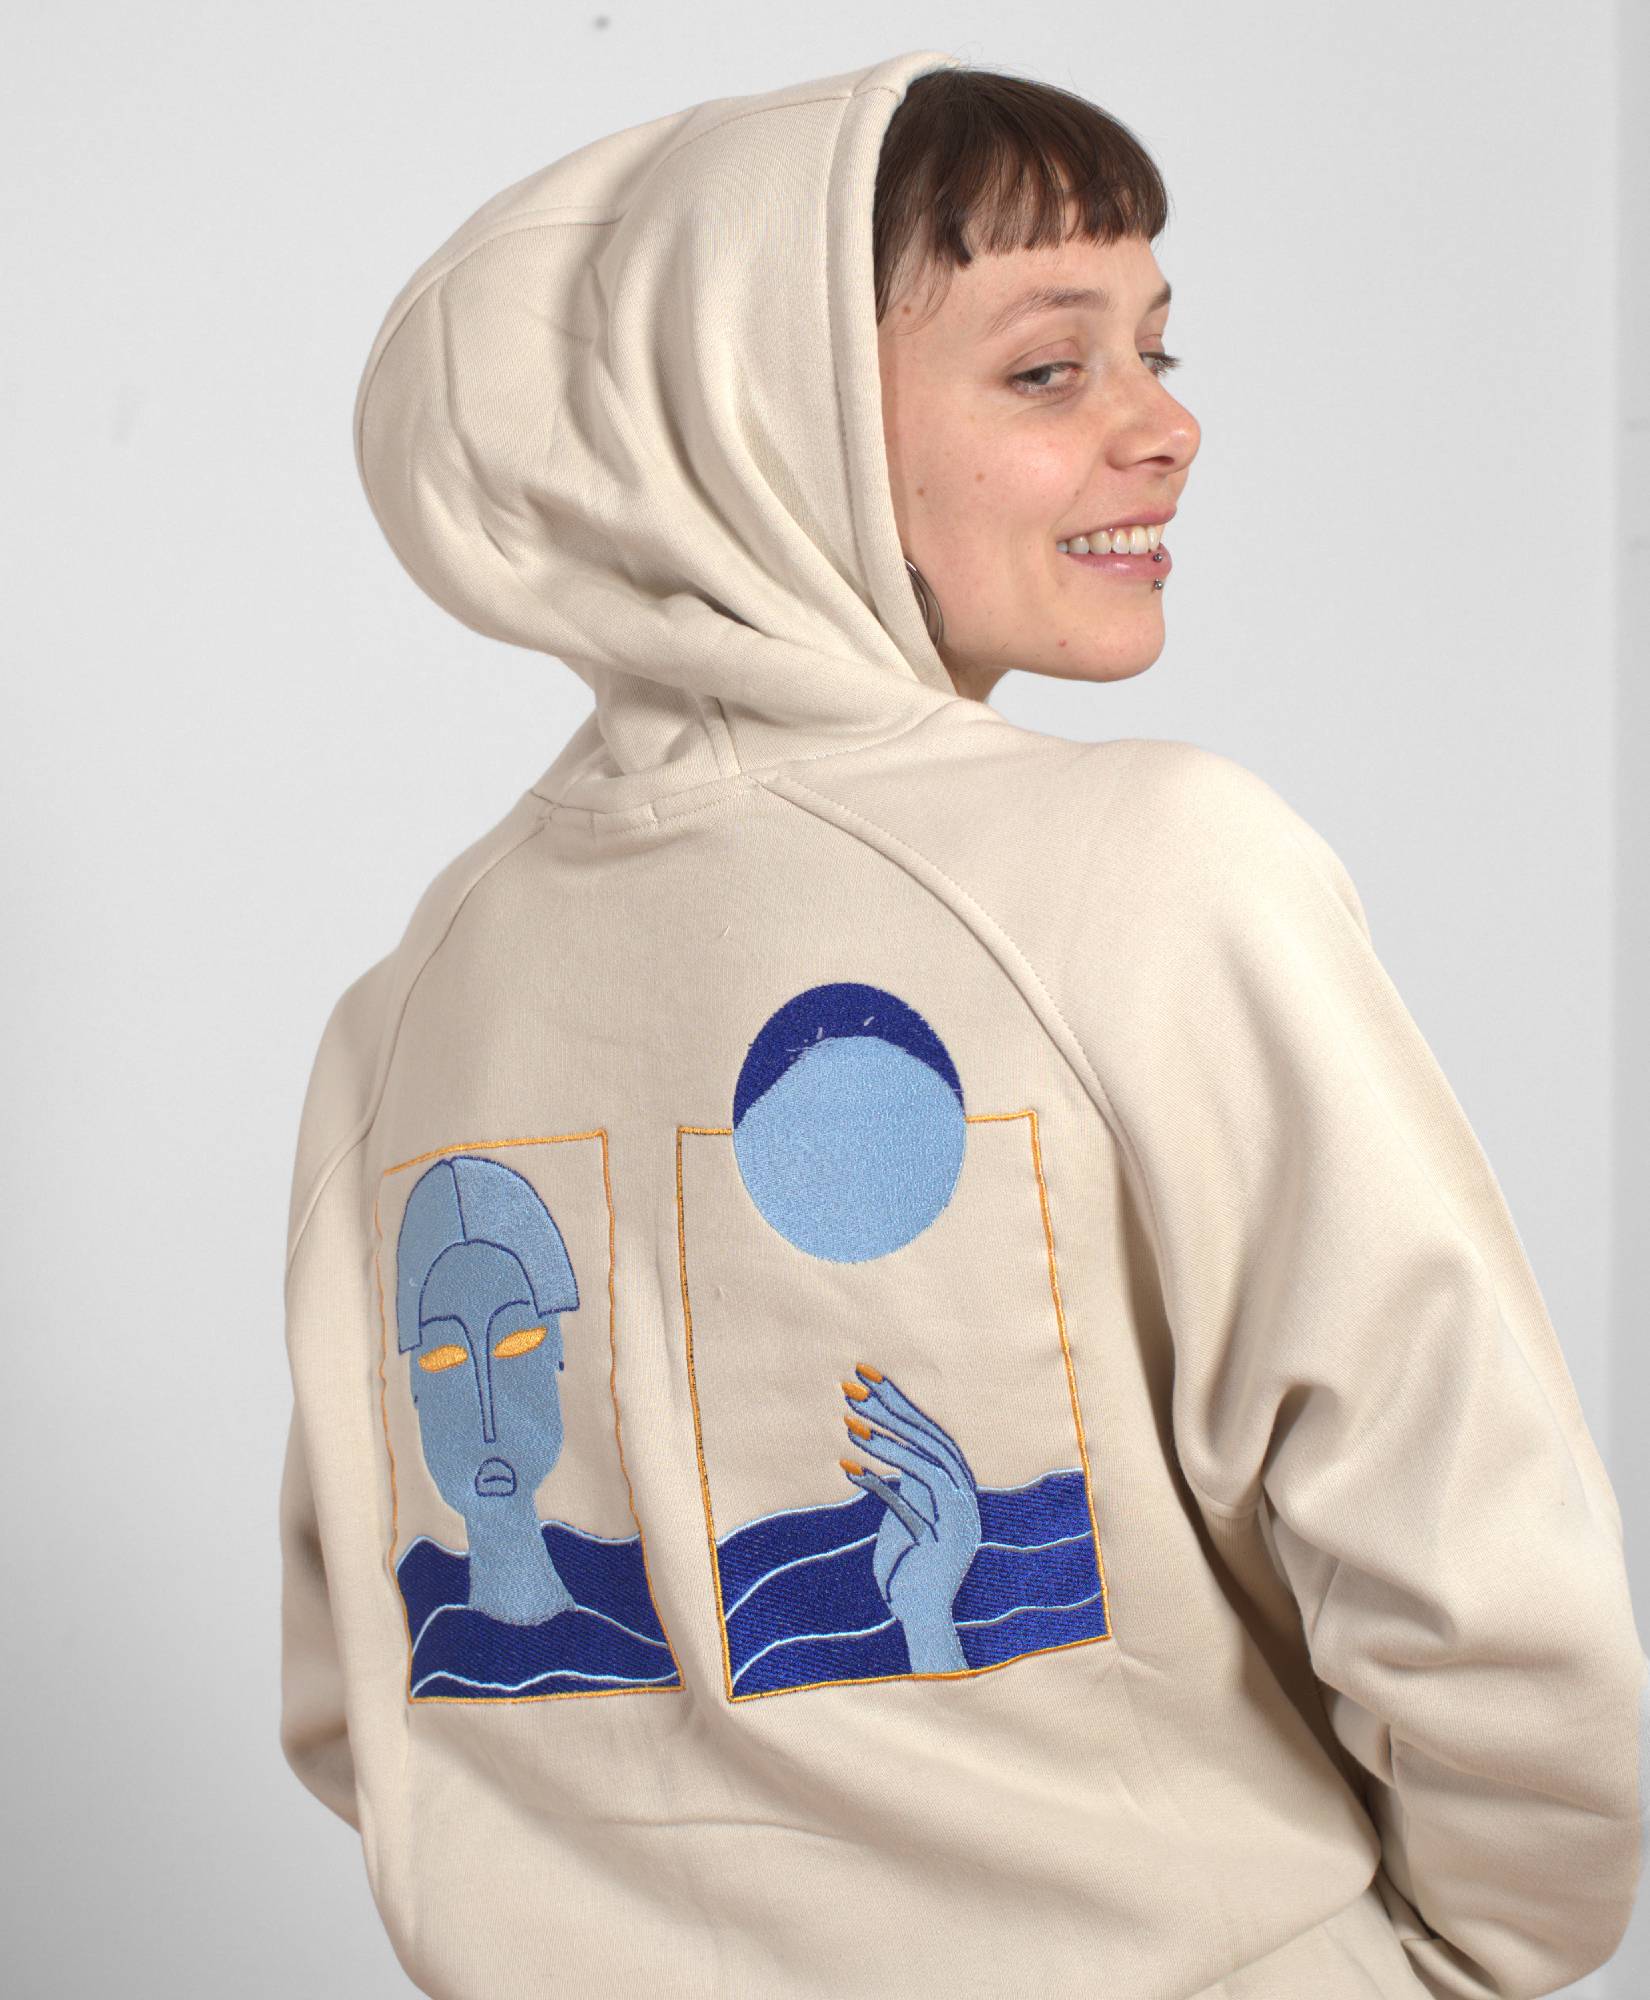 Embroidered art on Cotton Beige Hoodie / Stitched Beige Hoody